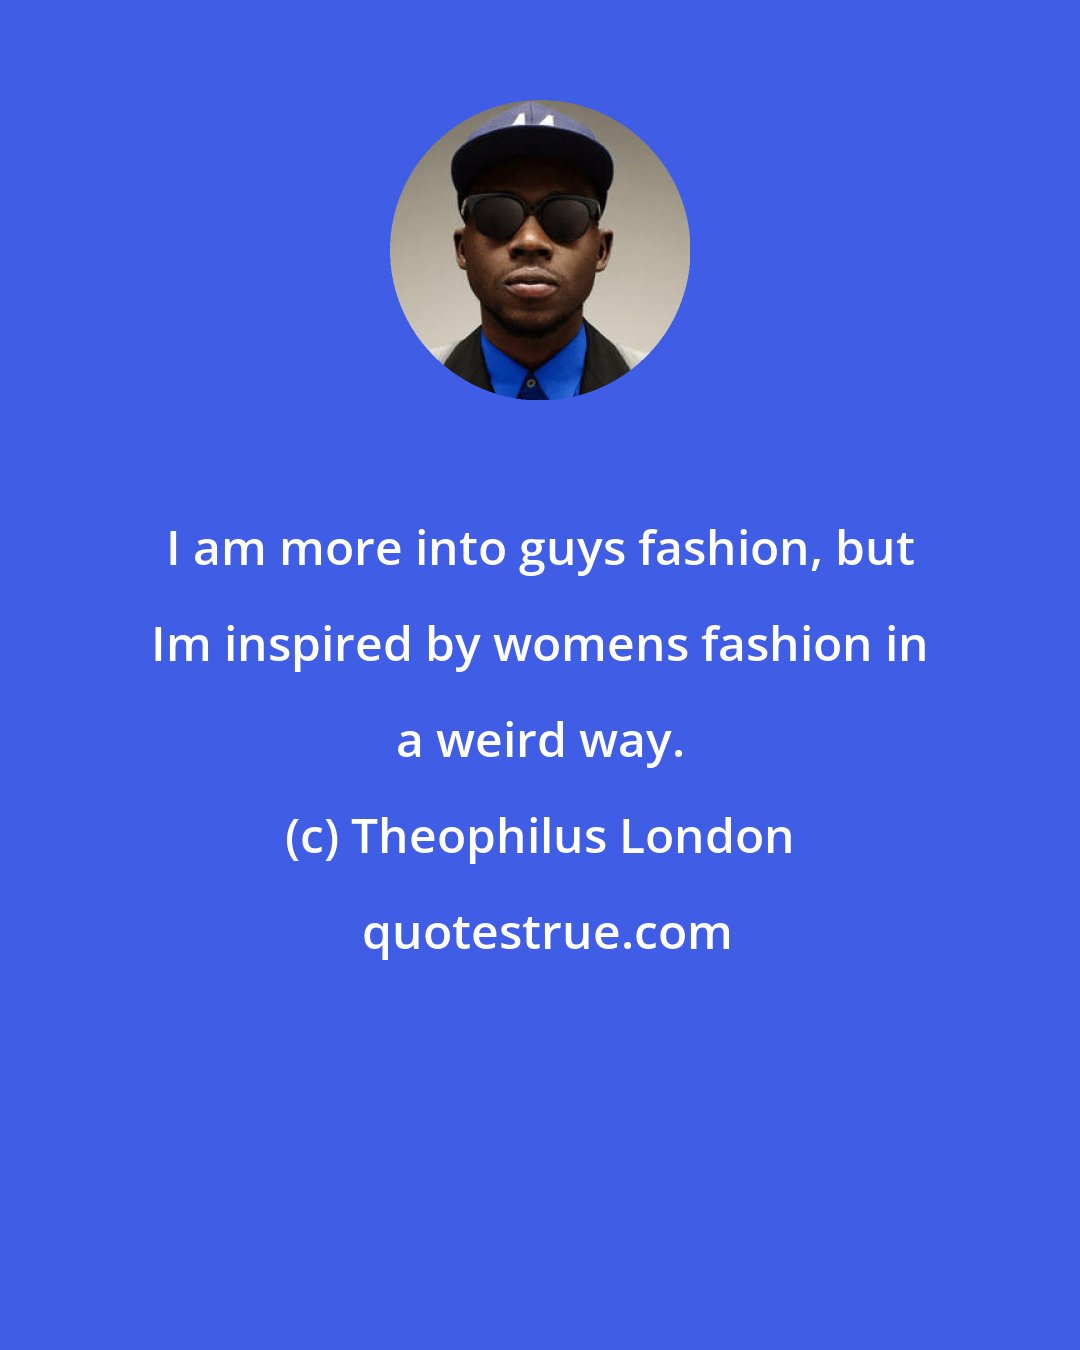 Theophilus London: I am more into guys fashion, but Im inspired by womens fashion in a weird way.